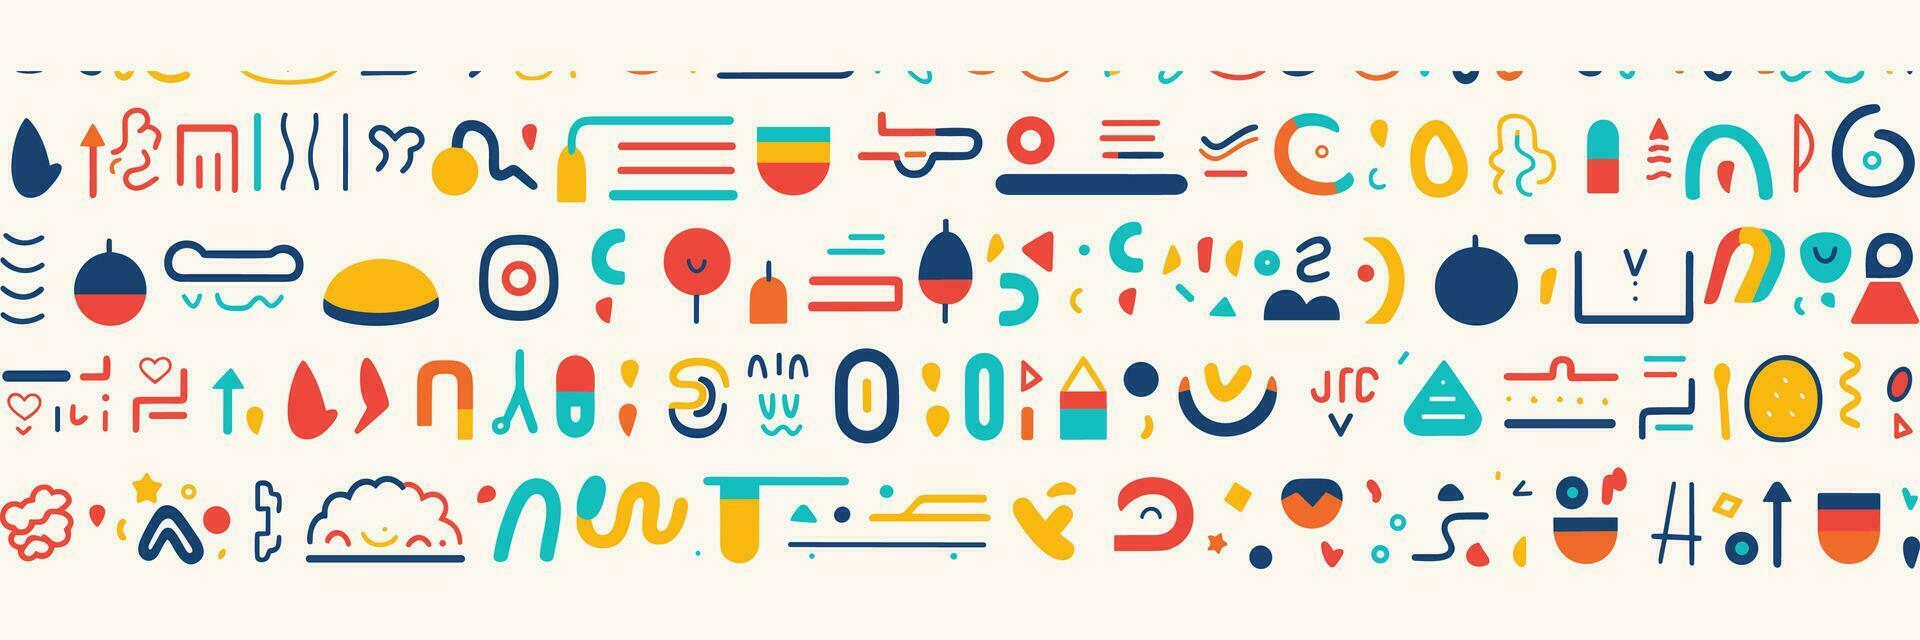 colorful line doodle shapes in a creative minimalist style, perfect for children's parties and celebrations. This collection features basic shapes and simple, upbeat, childlike drawings vector